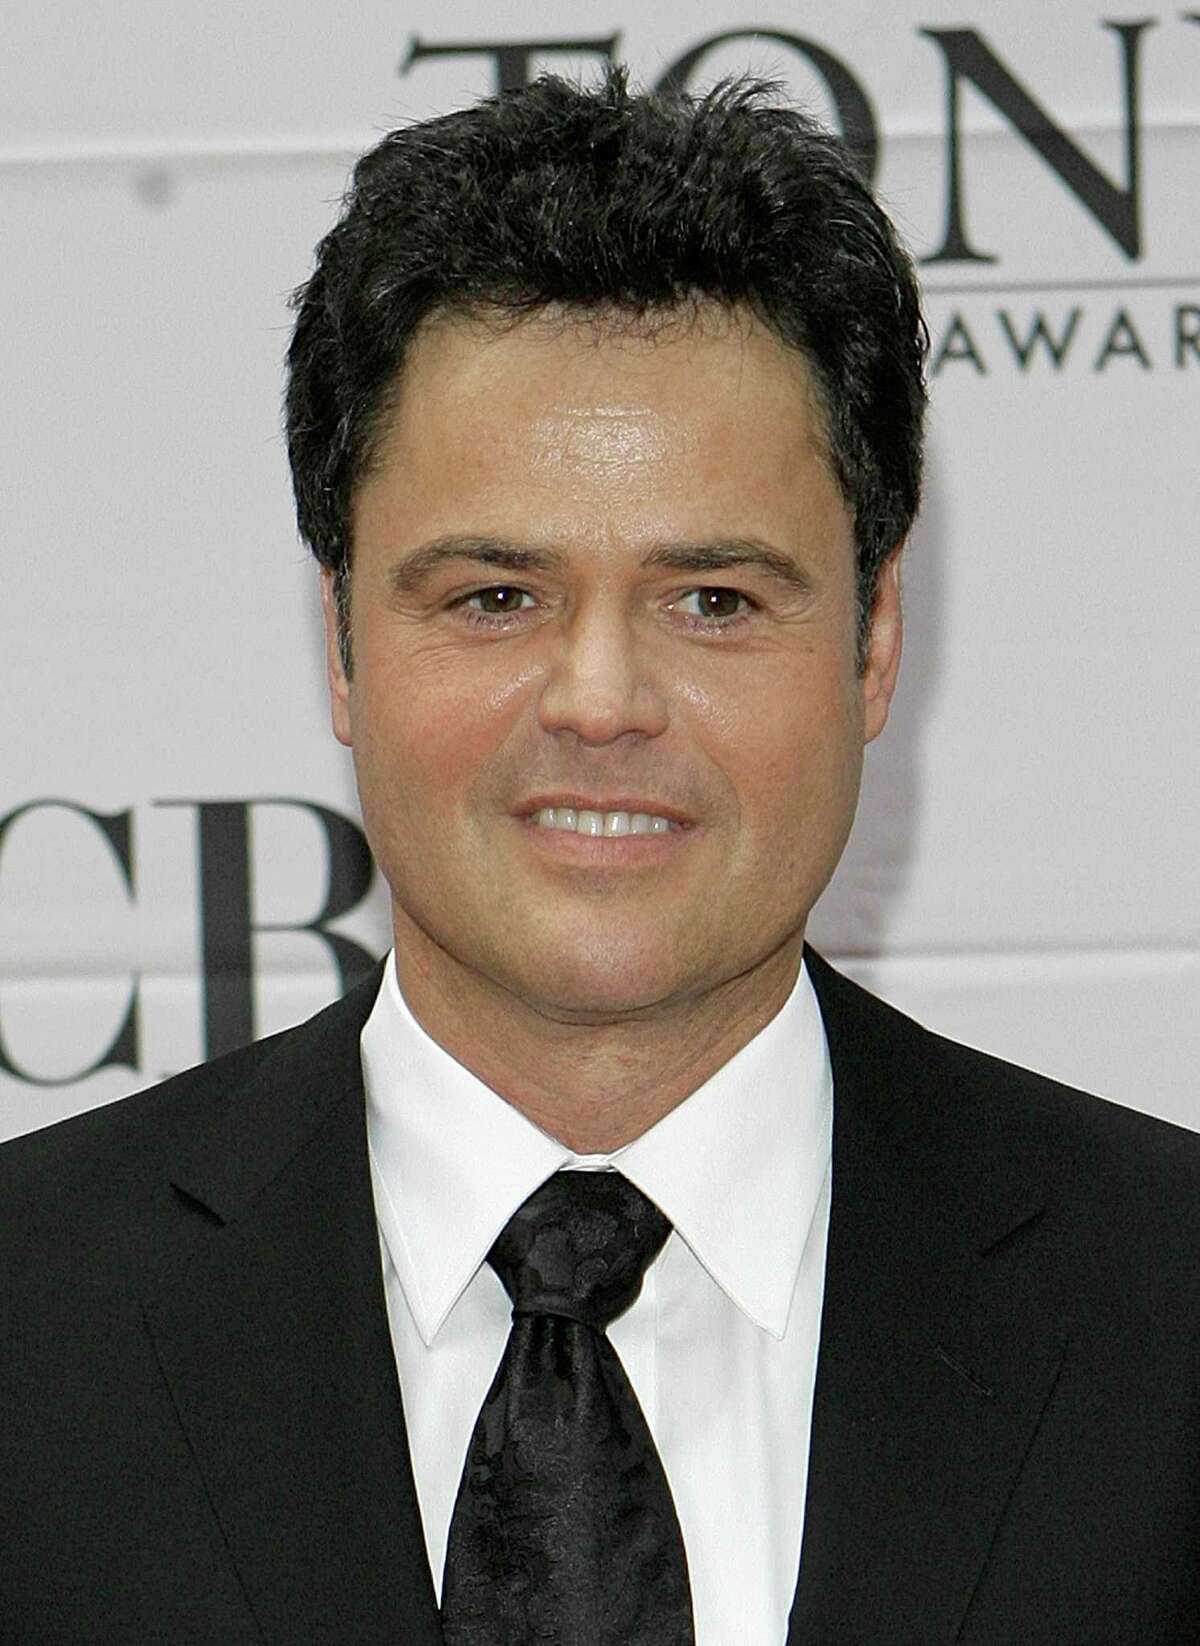 Donny Osmond arrives at the 61st Annual Tony Awards in New York, in this June 10, 2007 file photo. (AP Photo/Stuart Ramson, File)